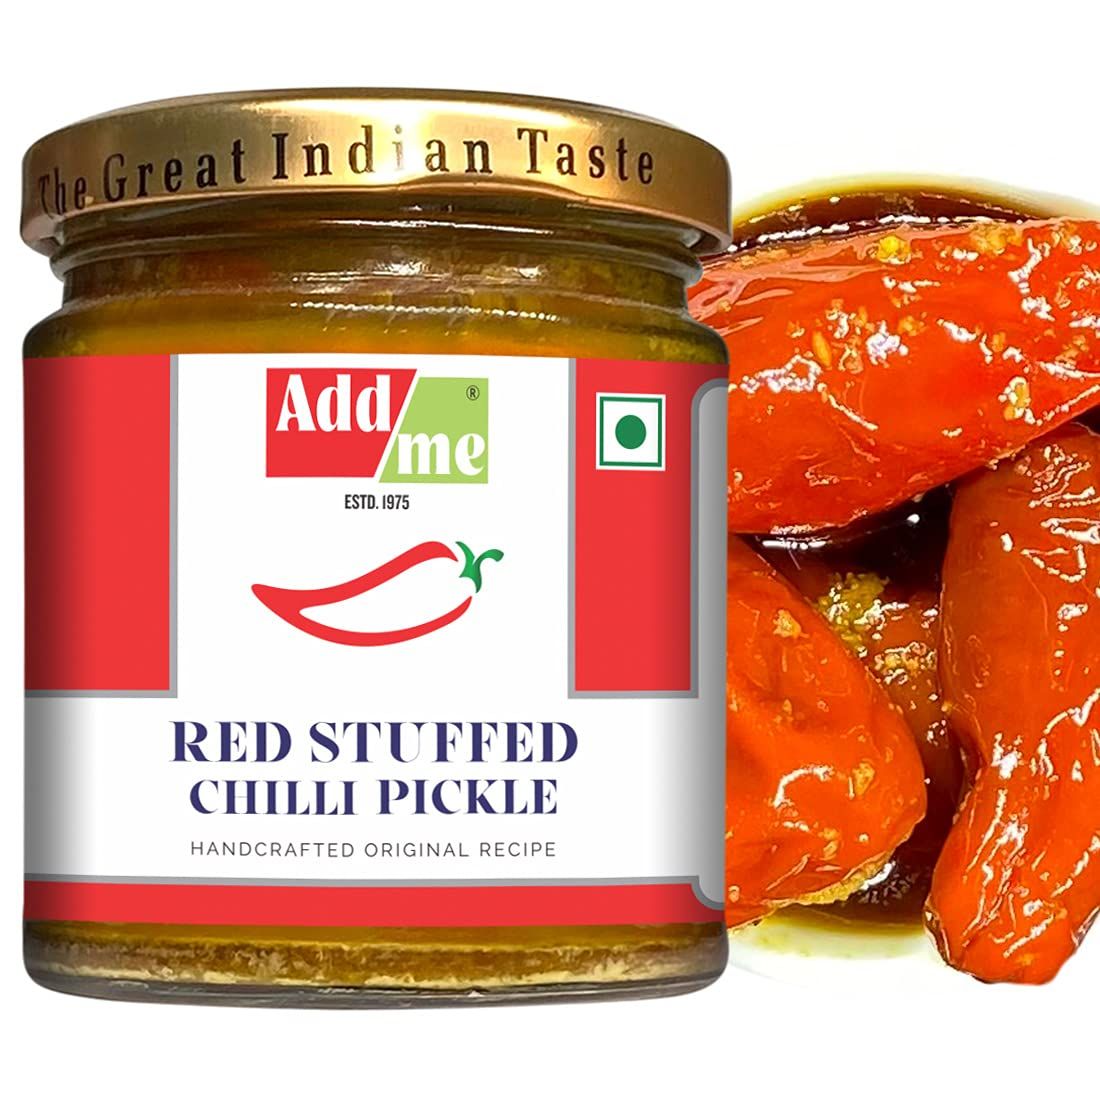 Add me Red Stuffed Chilli Pickles Image